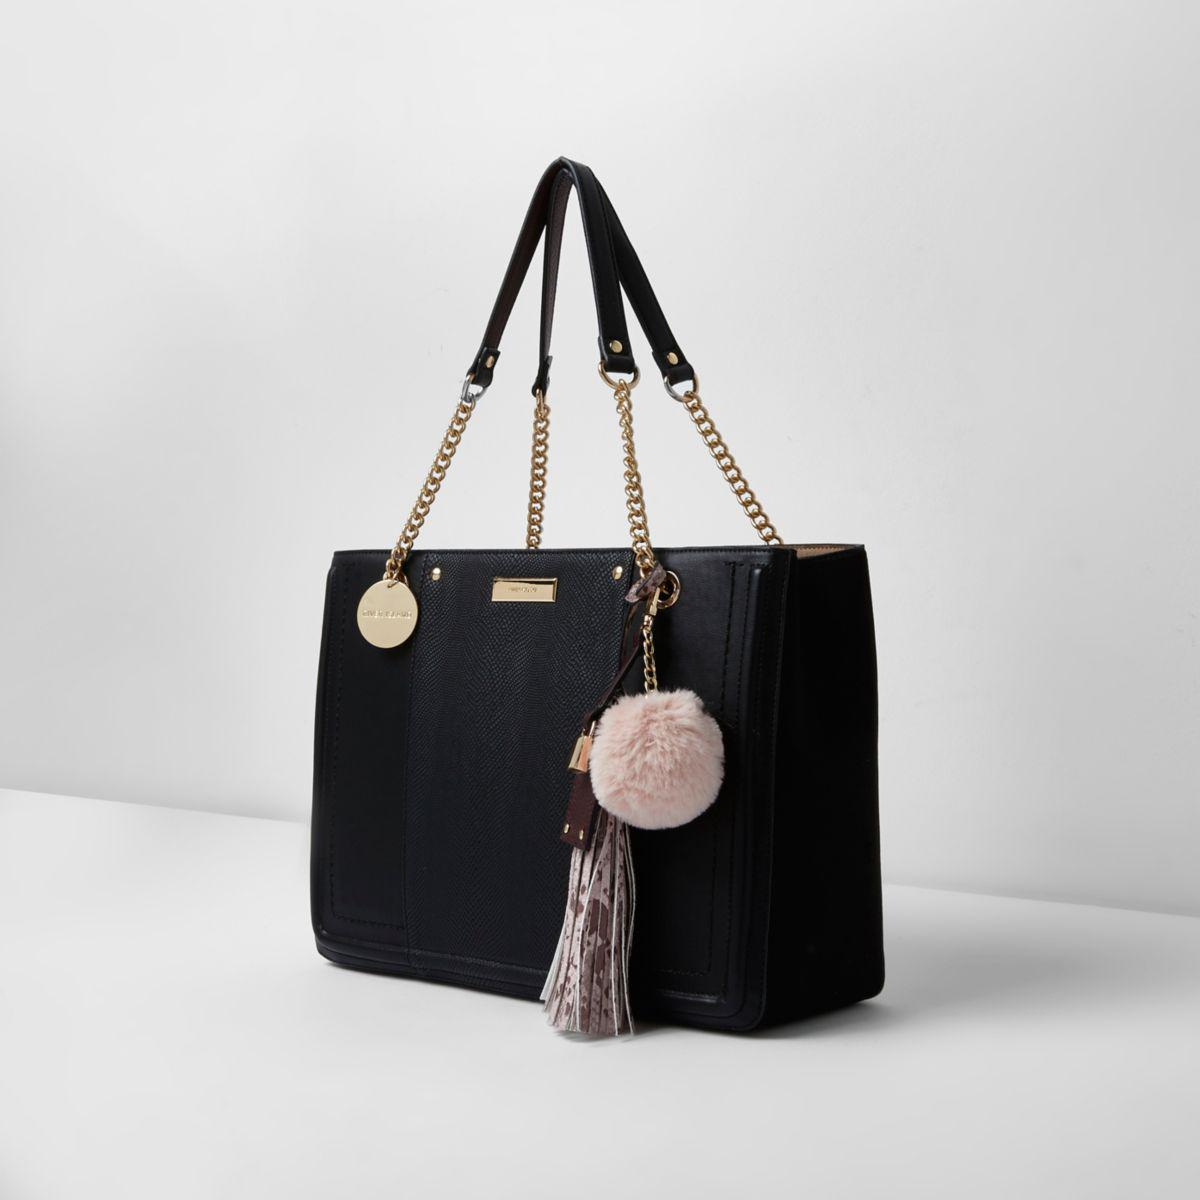 Lyst - River Island Black Chain Handle Tassel Structured Tote Bag in Black